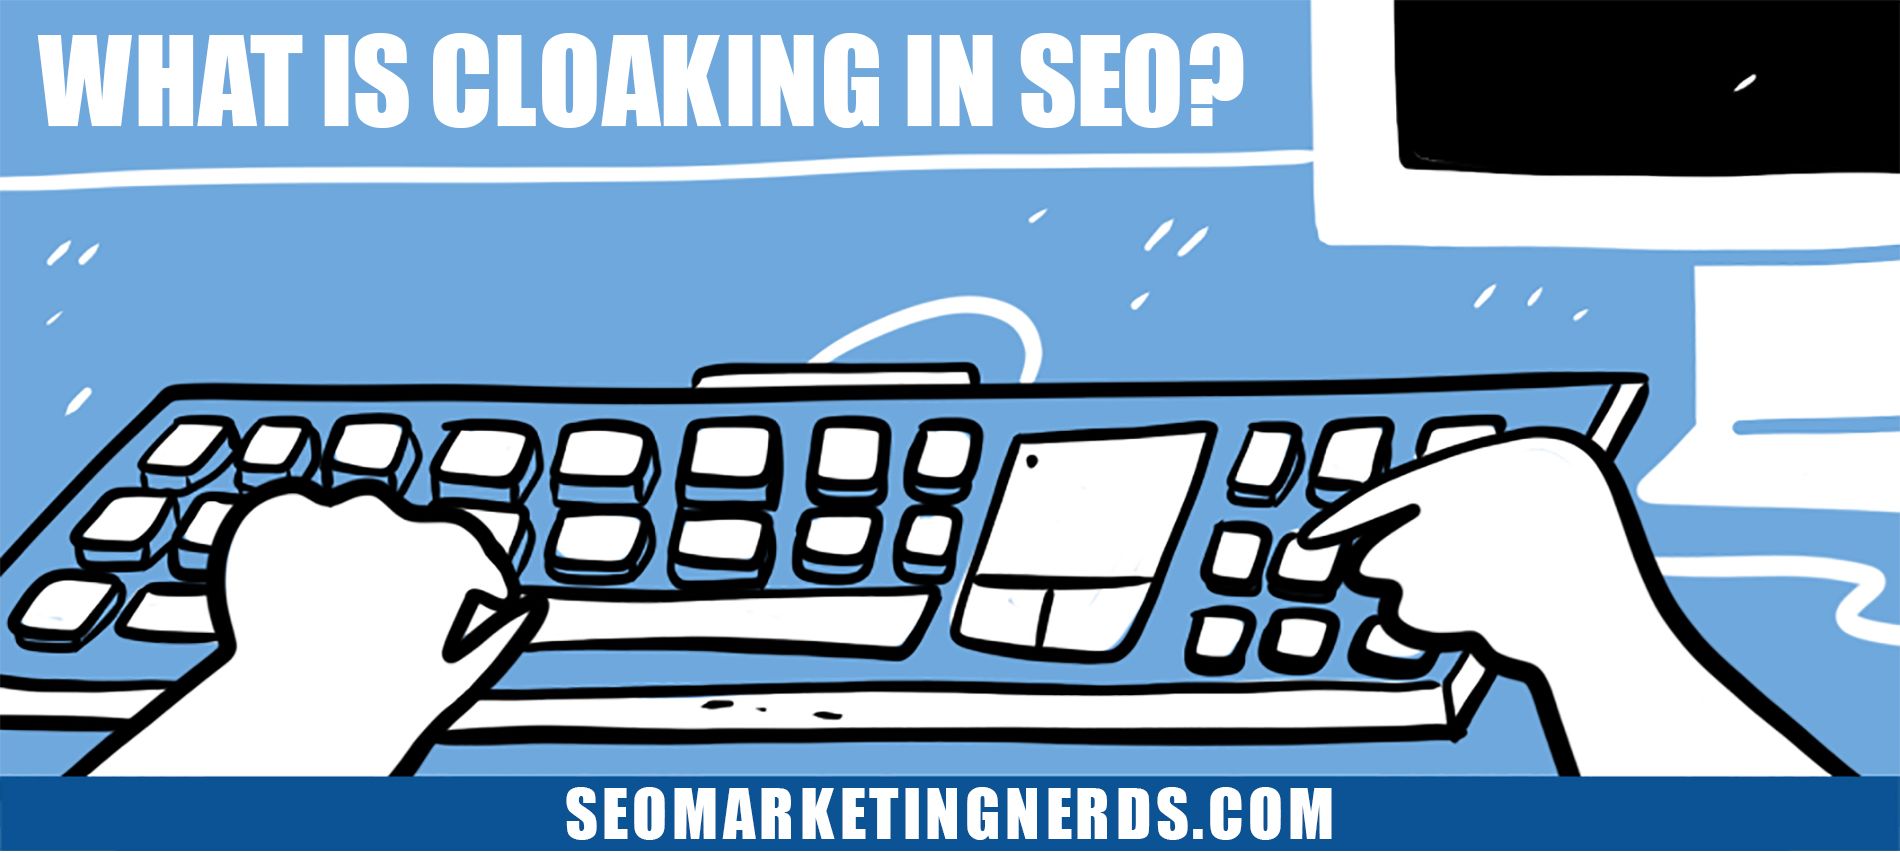 What is cloaking in SEO?